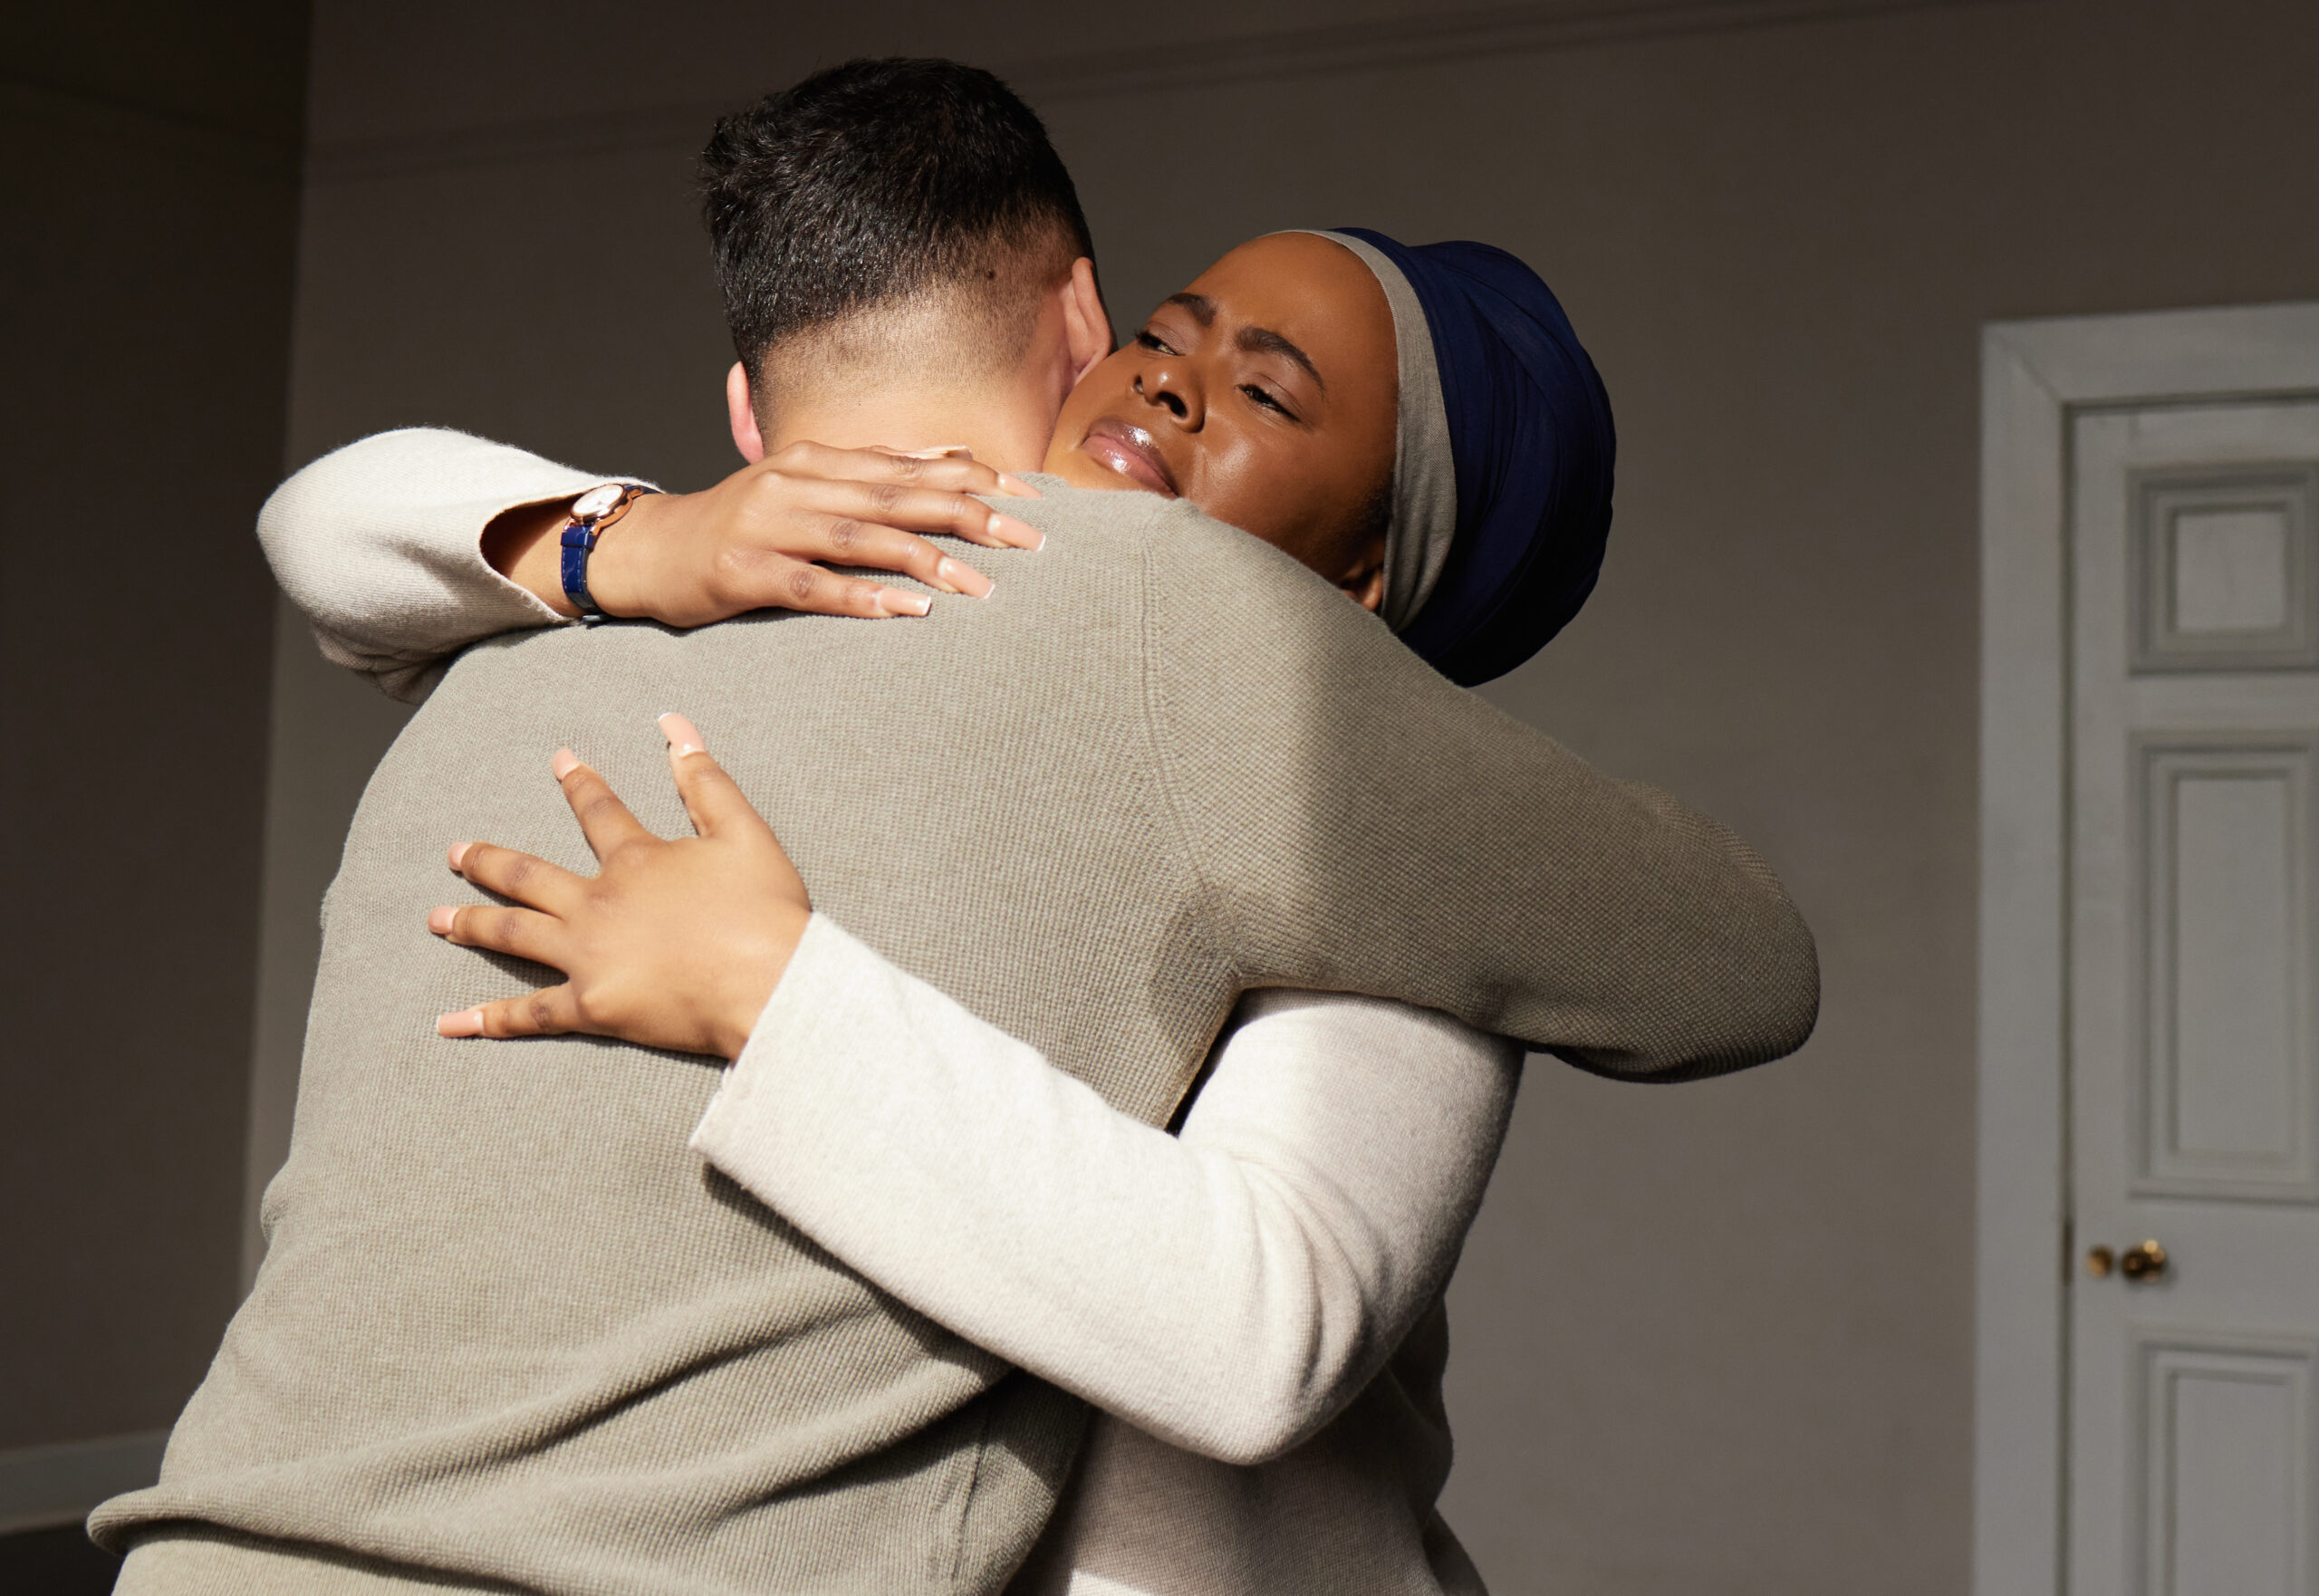 Hug, support and woman embrace a man for comfort, grief and care after bad news or problems in a home or house. Cancer, sad and depression by people hugging for empathy, love and hope together.